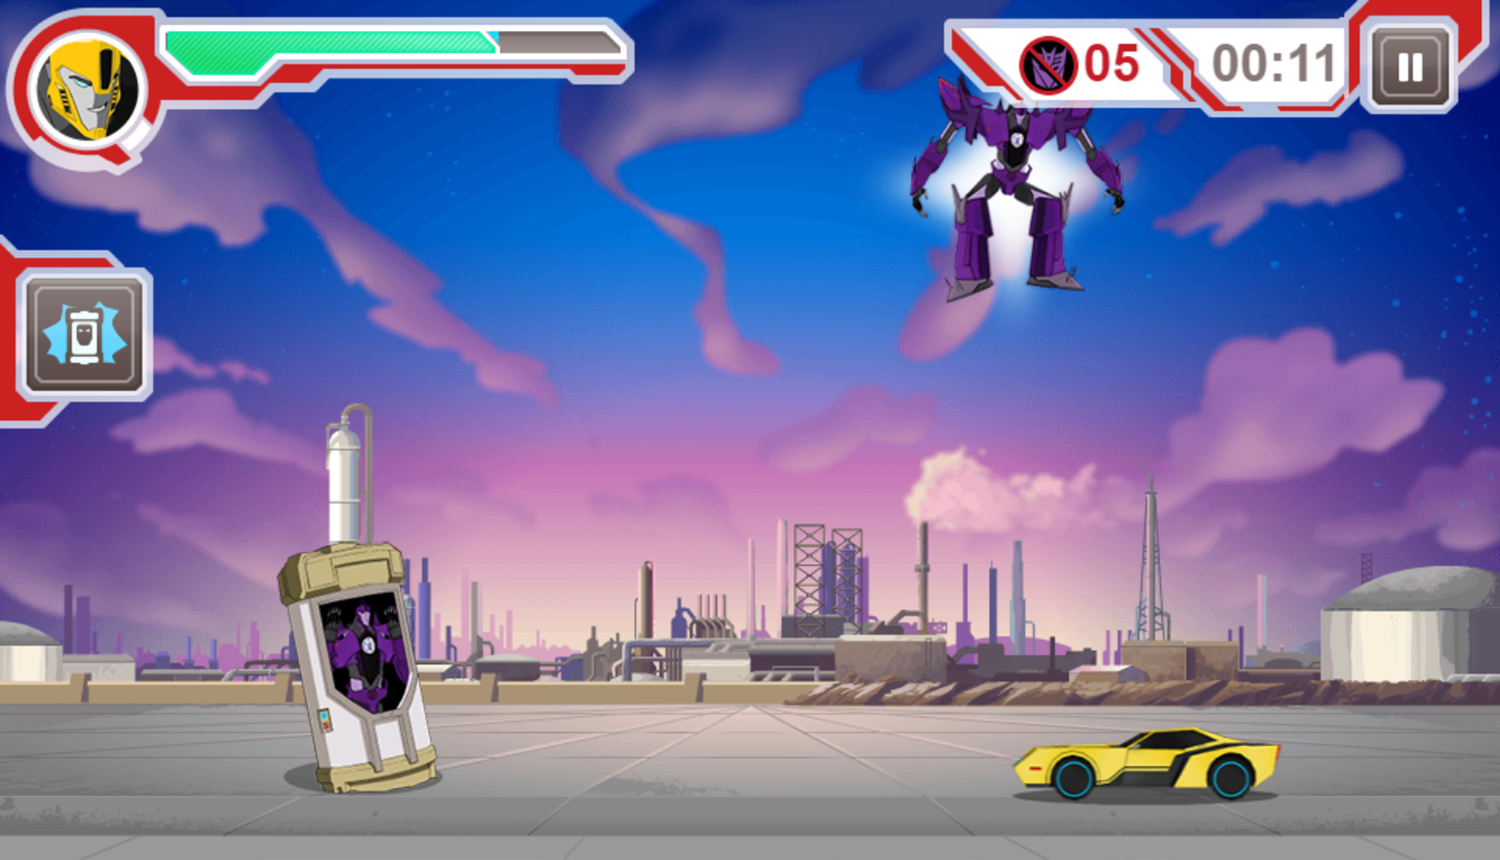 Transformers Protect Crown City Game Play Screenshot.